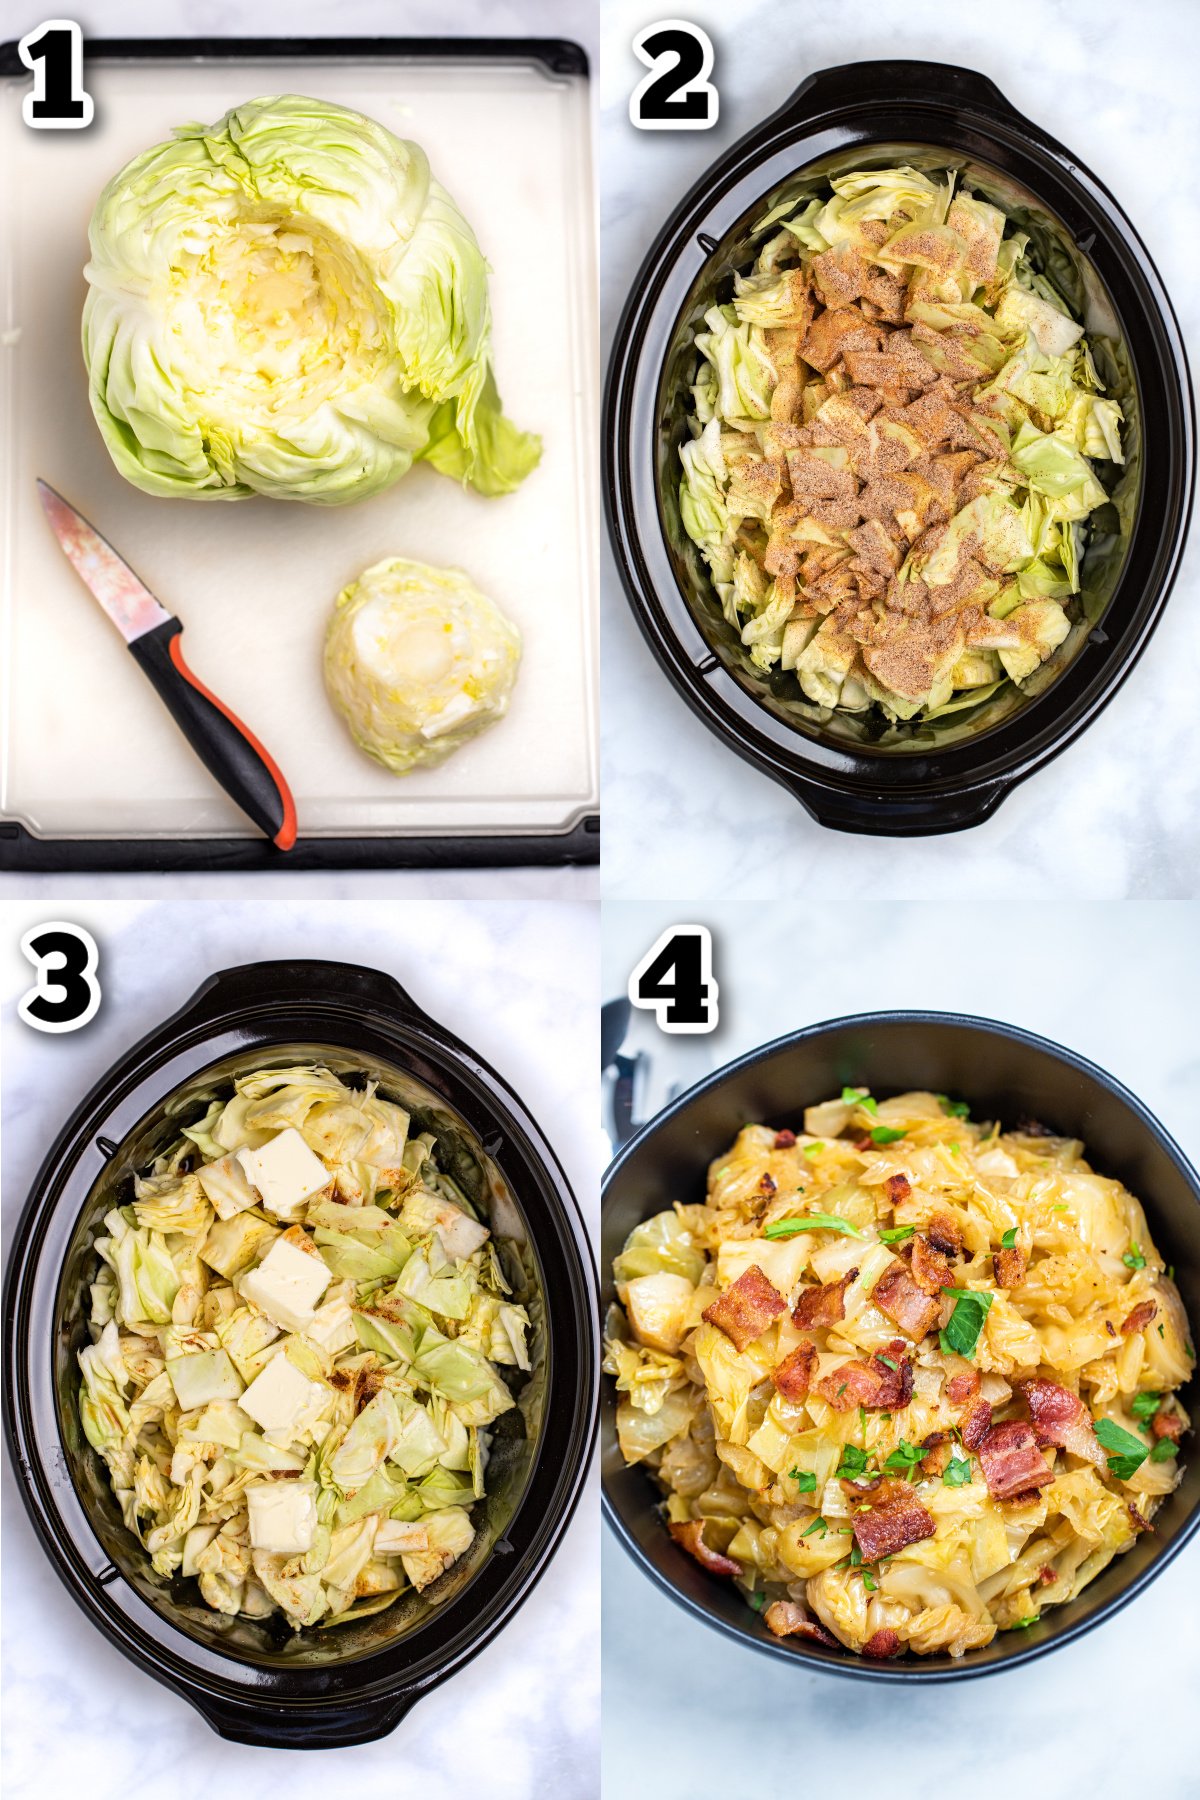 Step by step photos for how to make crockpot cabbage.